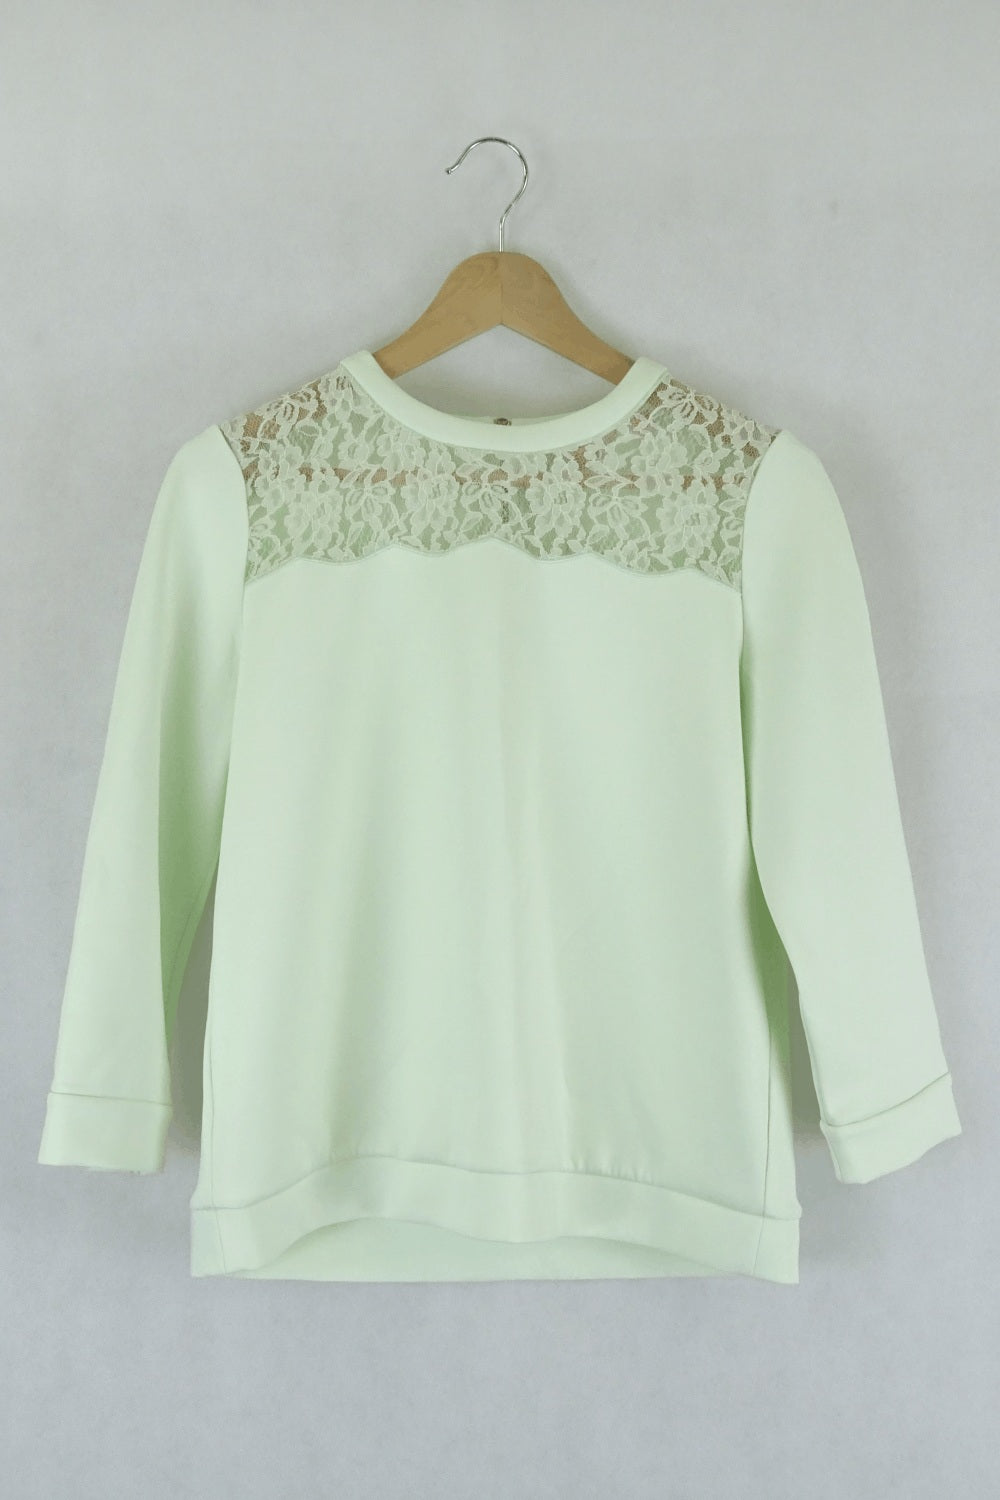 Ted baker green lace jumper 2